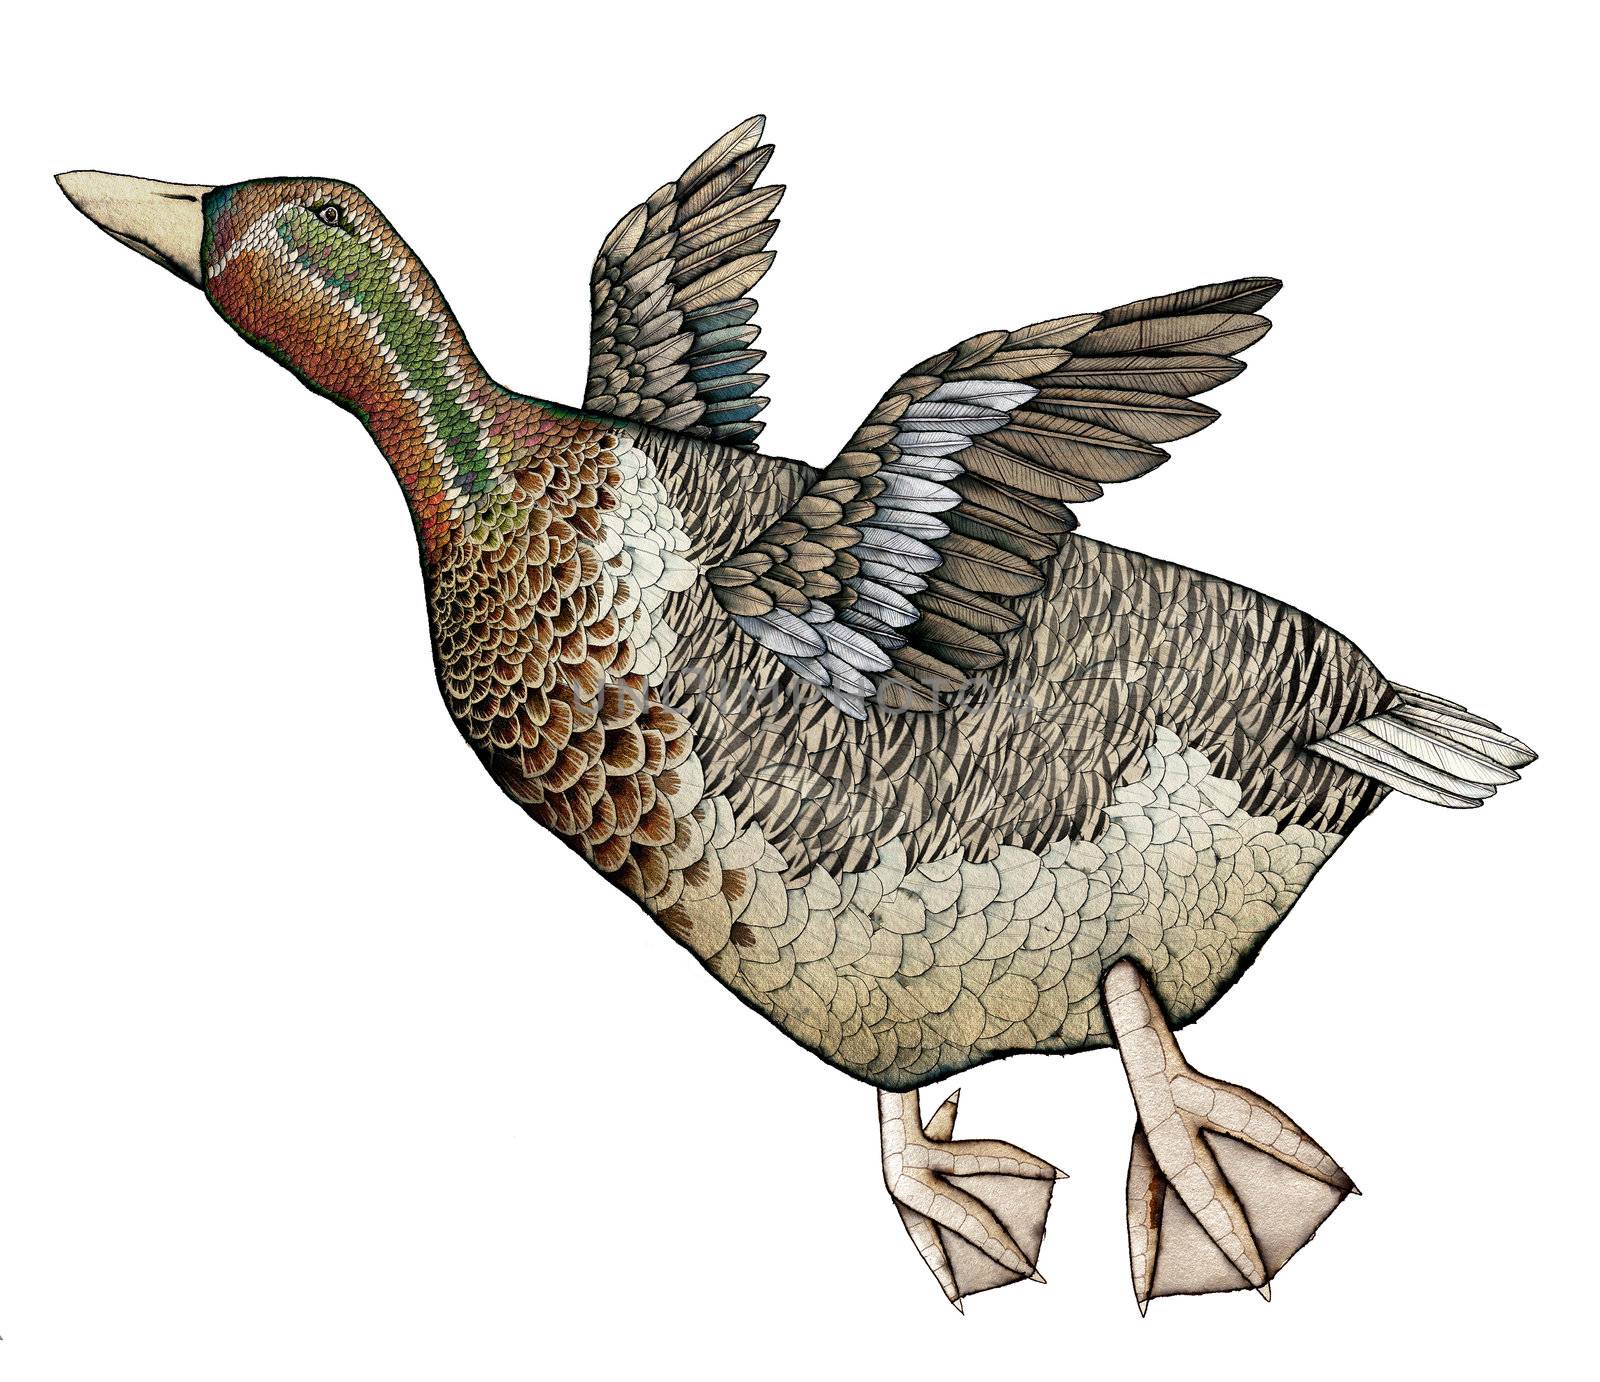 Goose or duck, Color Illustration by Morphart